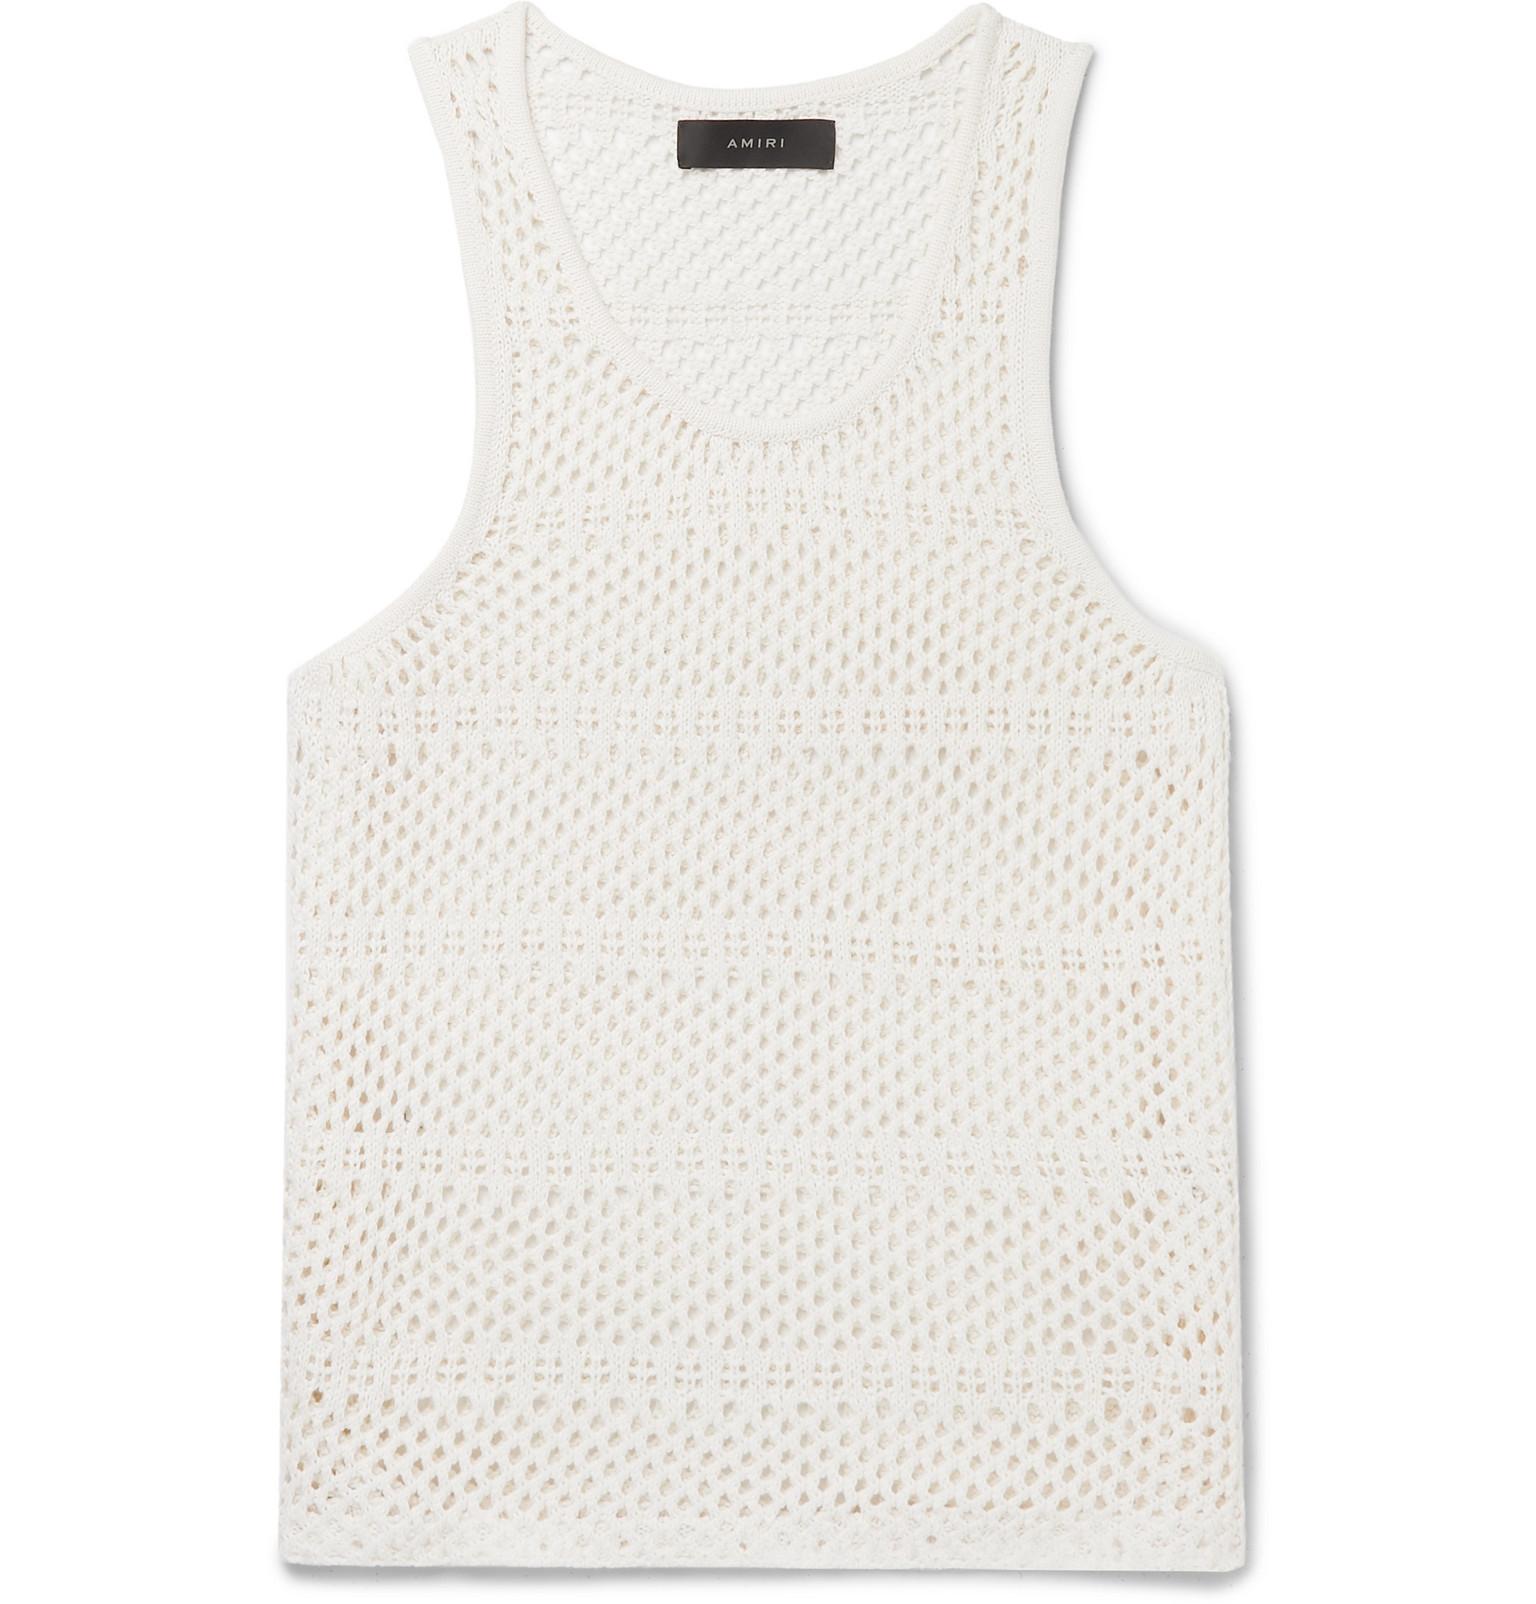 Amiri Crocheted Cotton And Cashmere-blend Tank Top in White for Men - Lyst